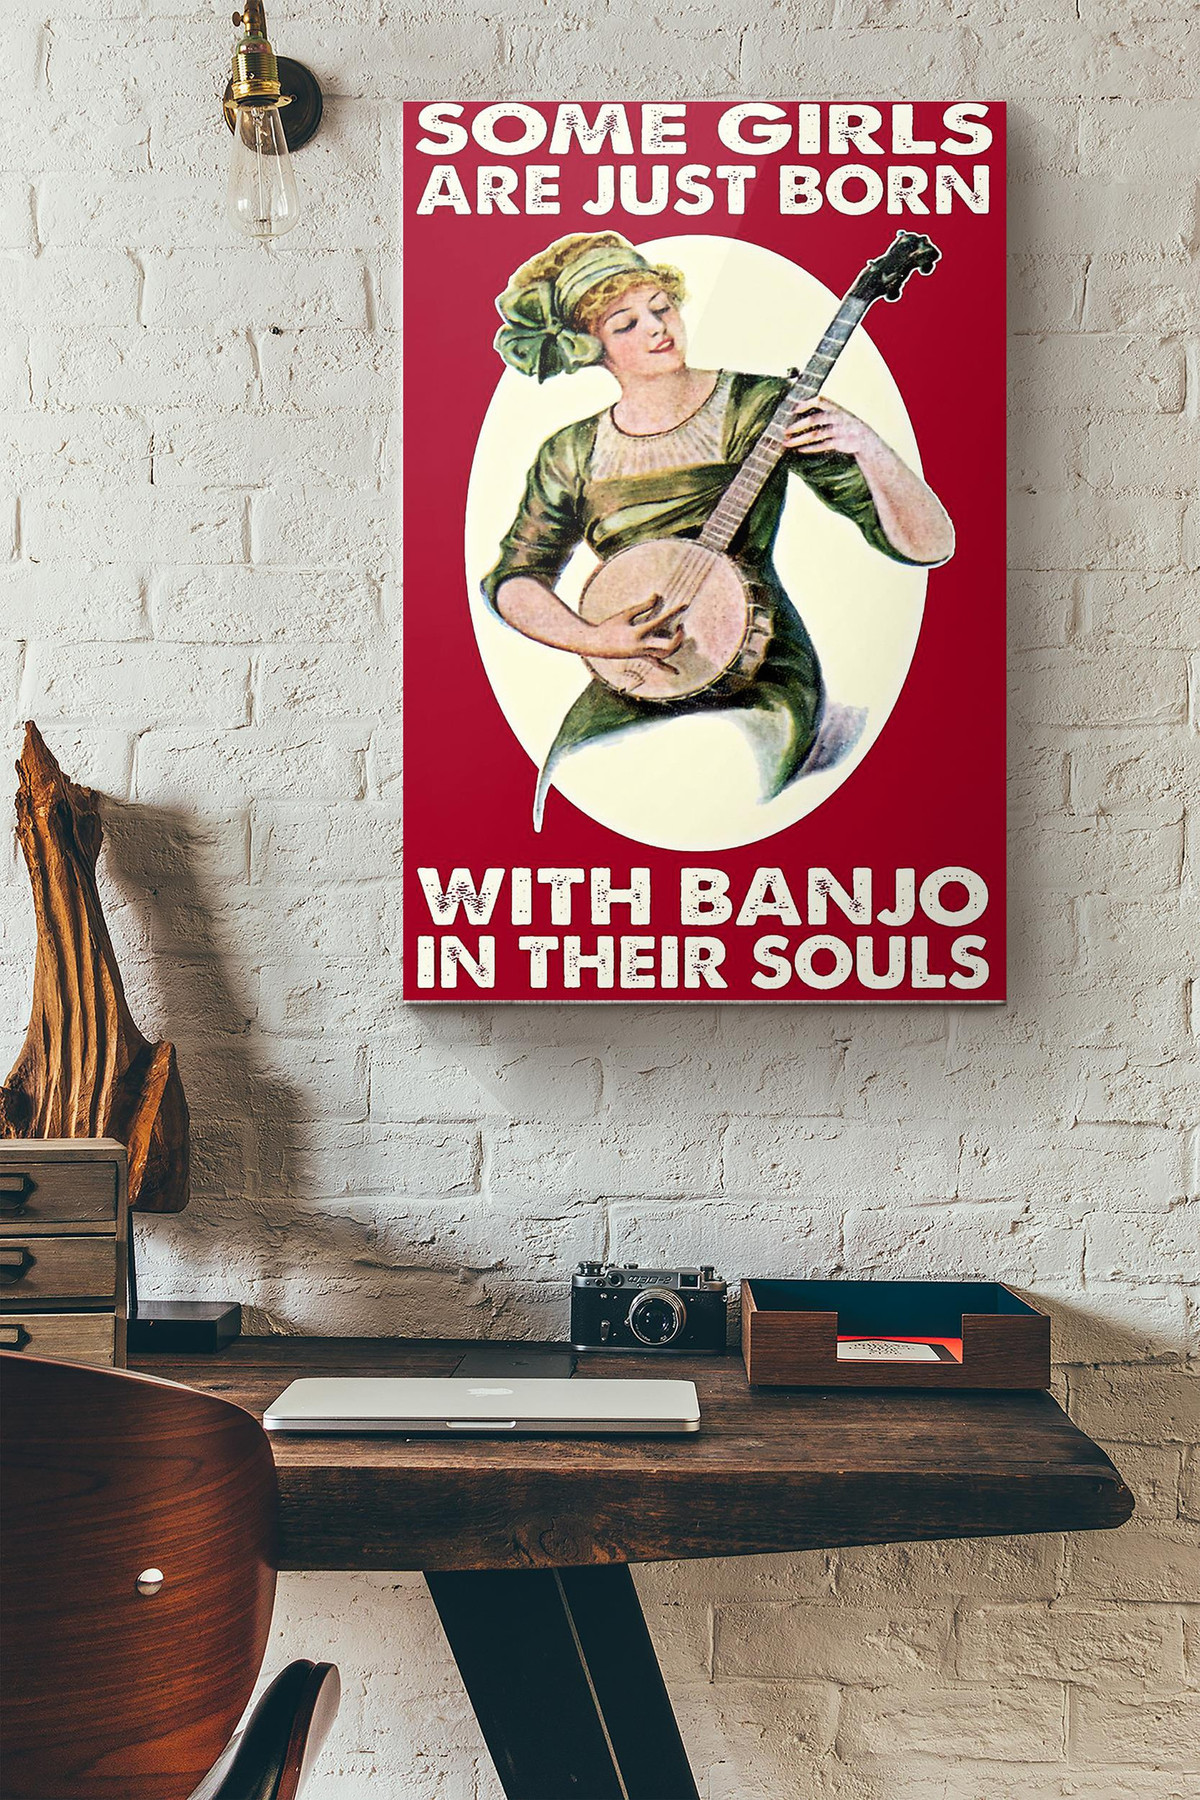 Some Girls Are Just Born With Banjo In Their Souls Canvas Painting Ideas, Canvas Hanging Prints, Gift Idea Framed Prints, Canvas Paintings Wrapped Canvas 8x10